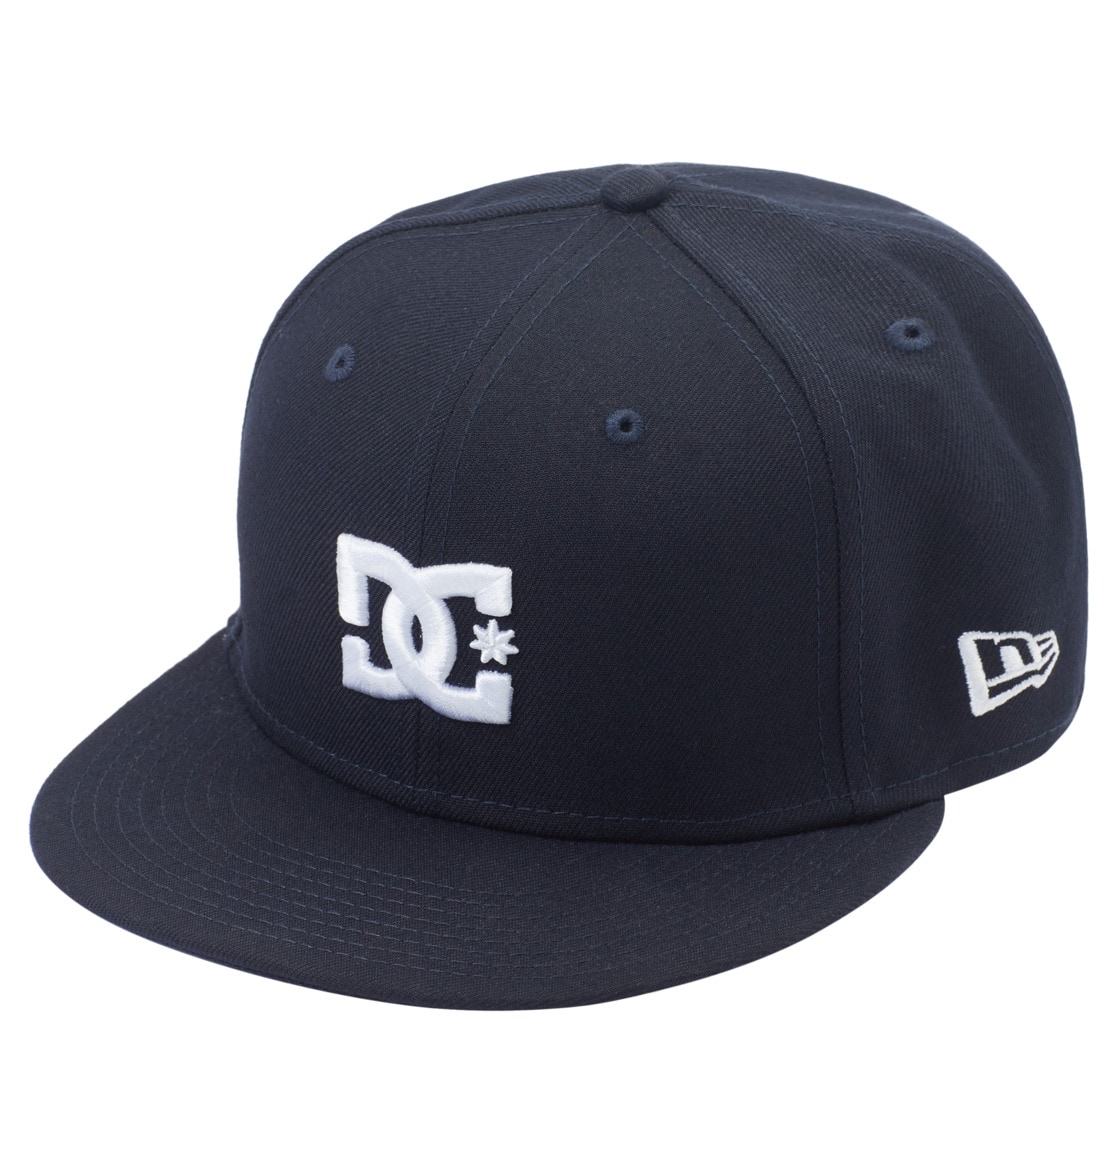 OTTO im Shop DC Shoes Cap Fitted Online »Championship«